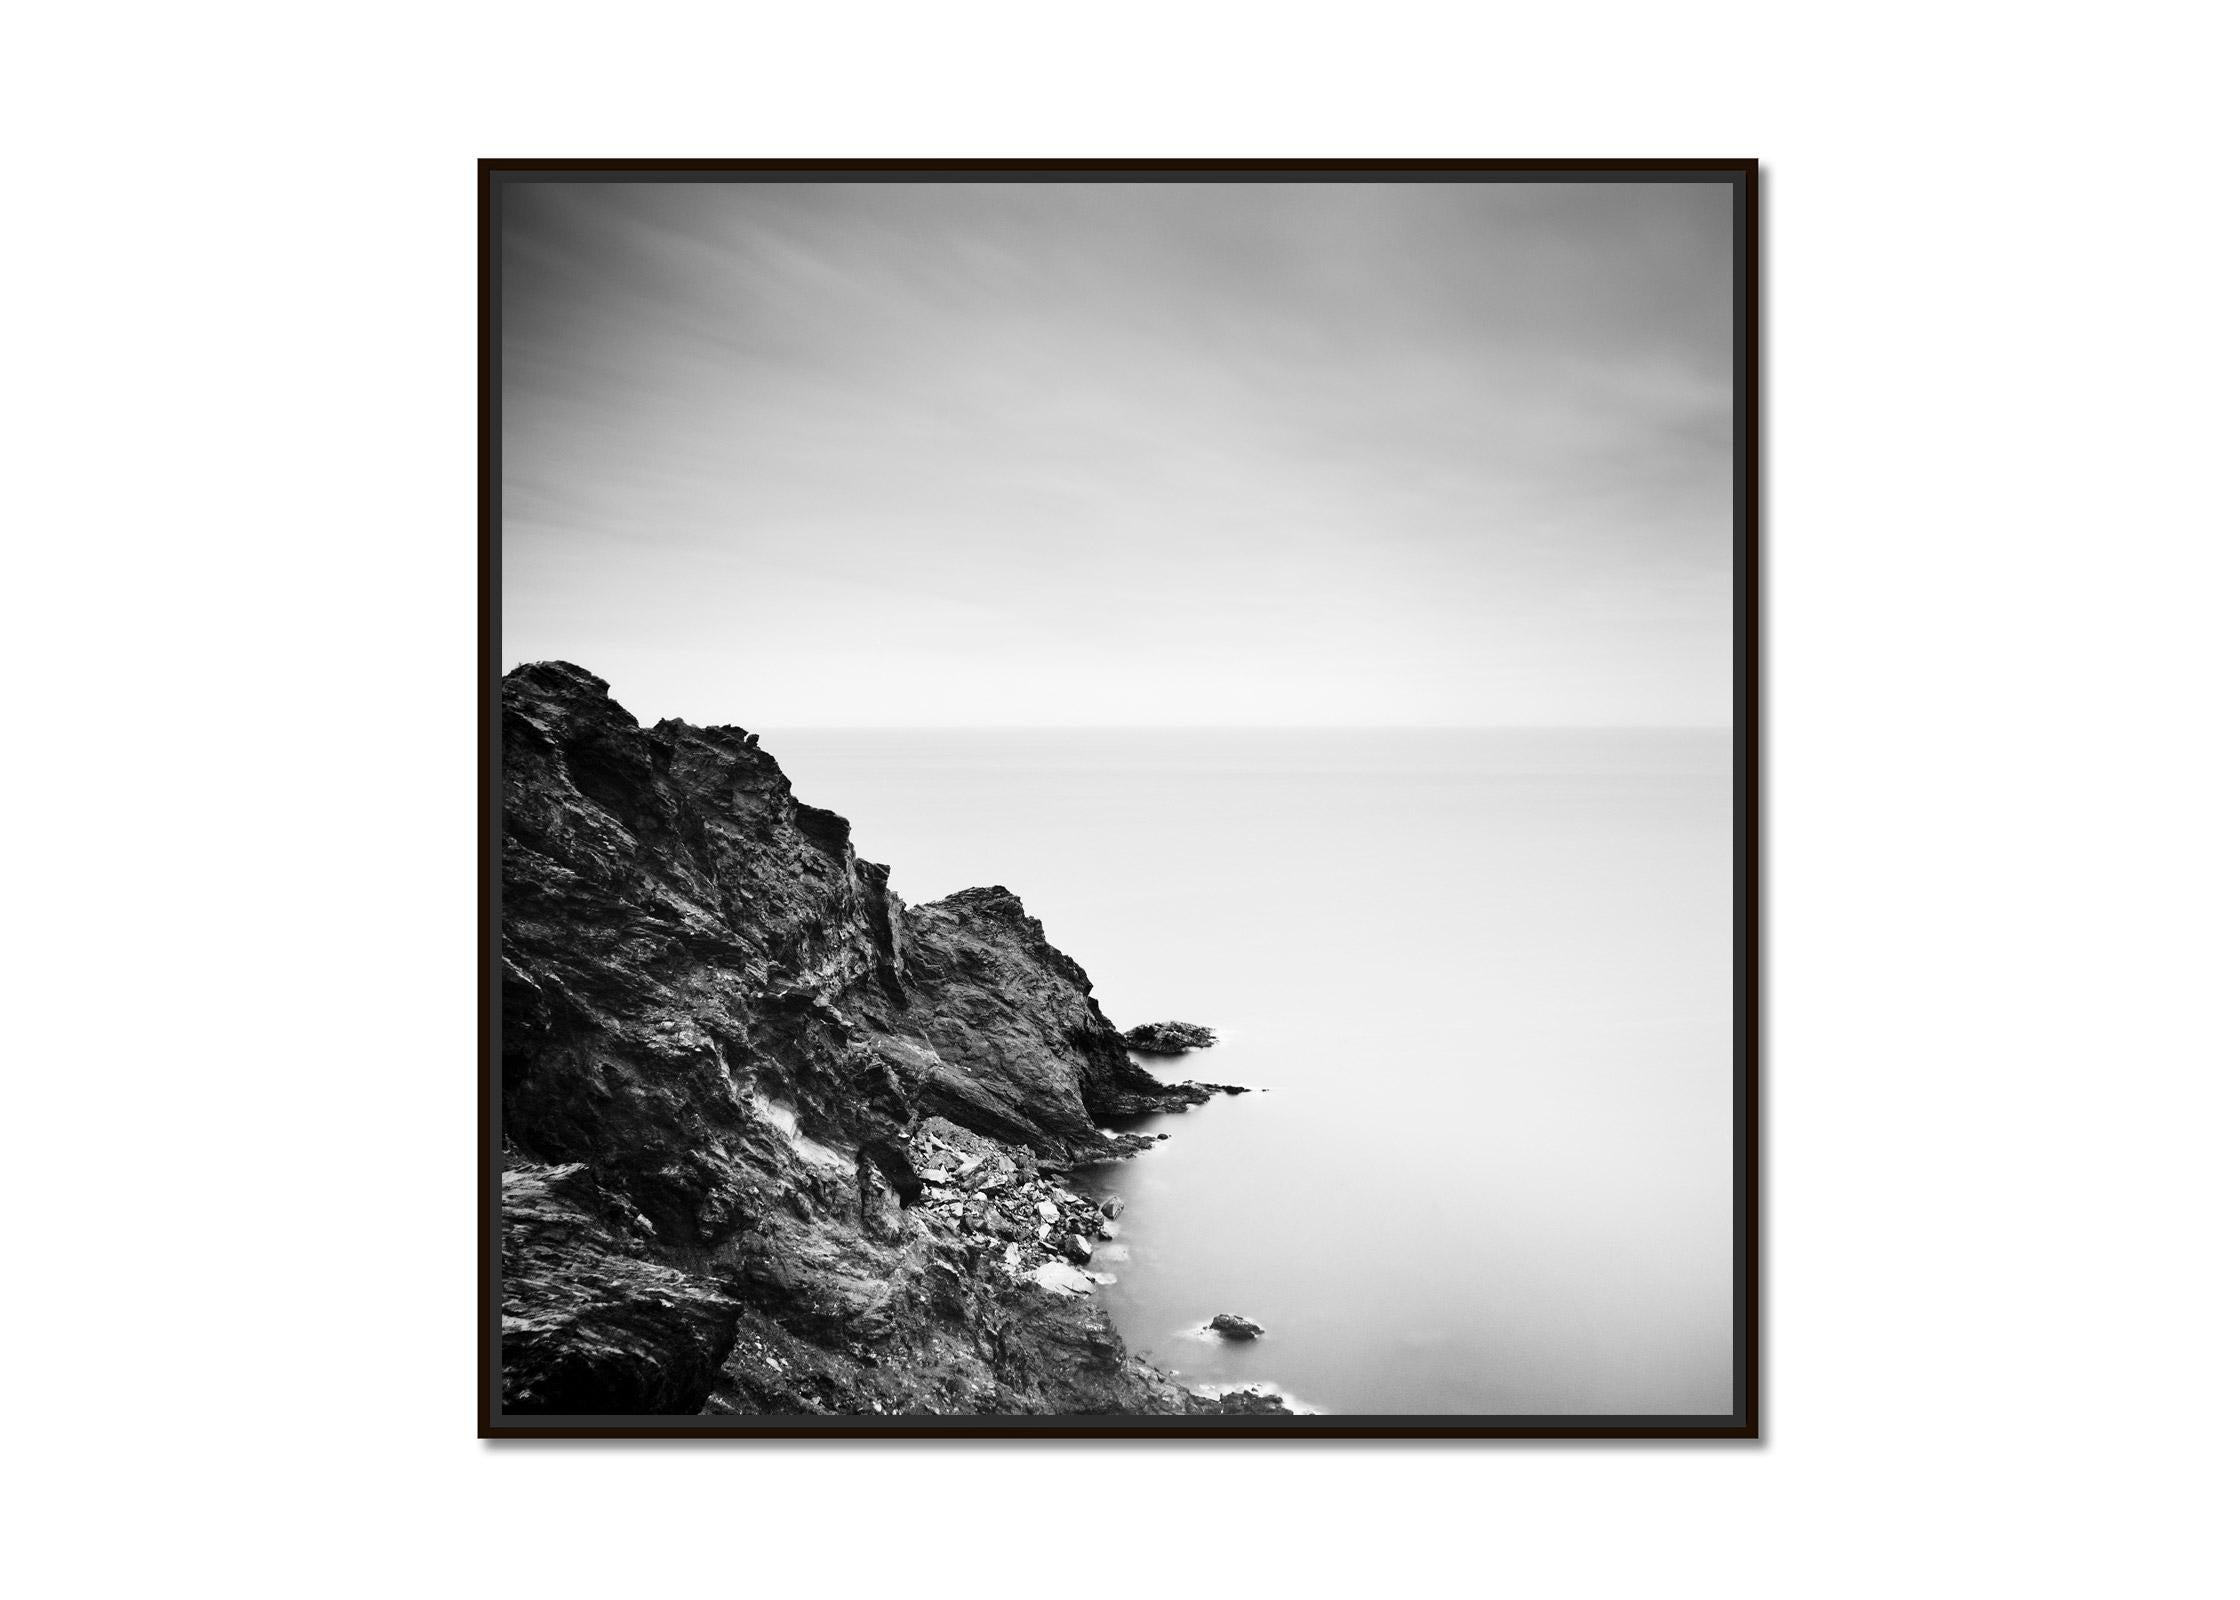 Atlantic Coast, cliffs, Portugal, art black and white photography, landscape - Photograph by Gerald Berghammer, Ina Forstinger